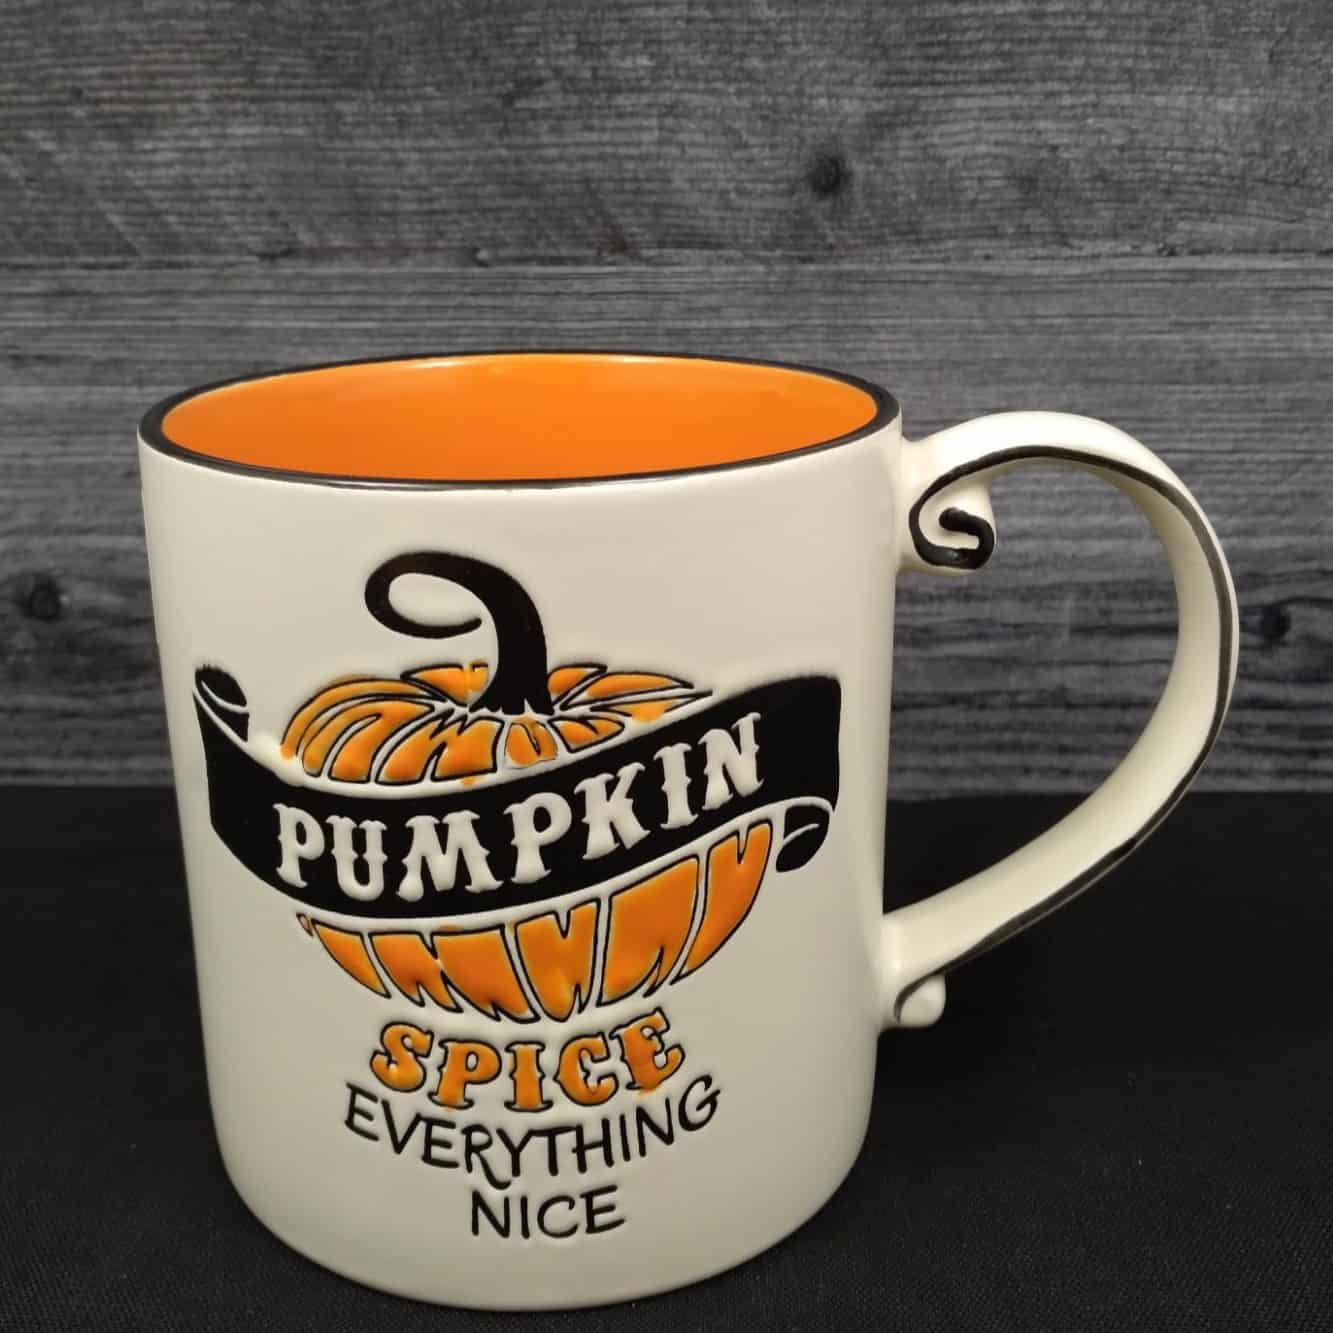 This Halloween Pumpkin Spice Coffee Mug Beverage Tea Cup 21oz 621ml by Blue Sky is made with love by Premier Homegoods! Shop more unique gift ideas today with Spots Initiatives, the best way to support creators.